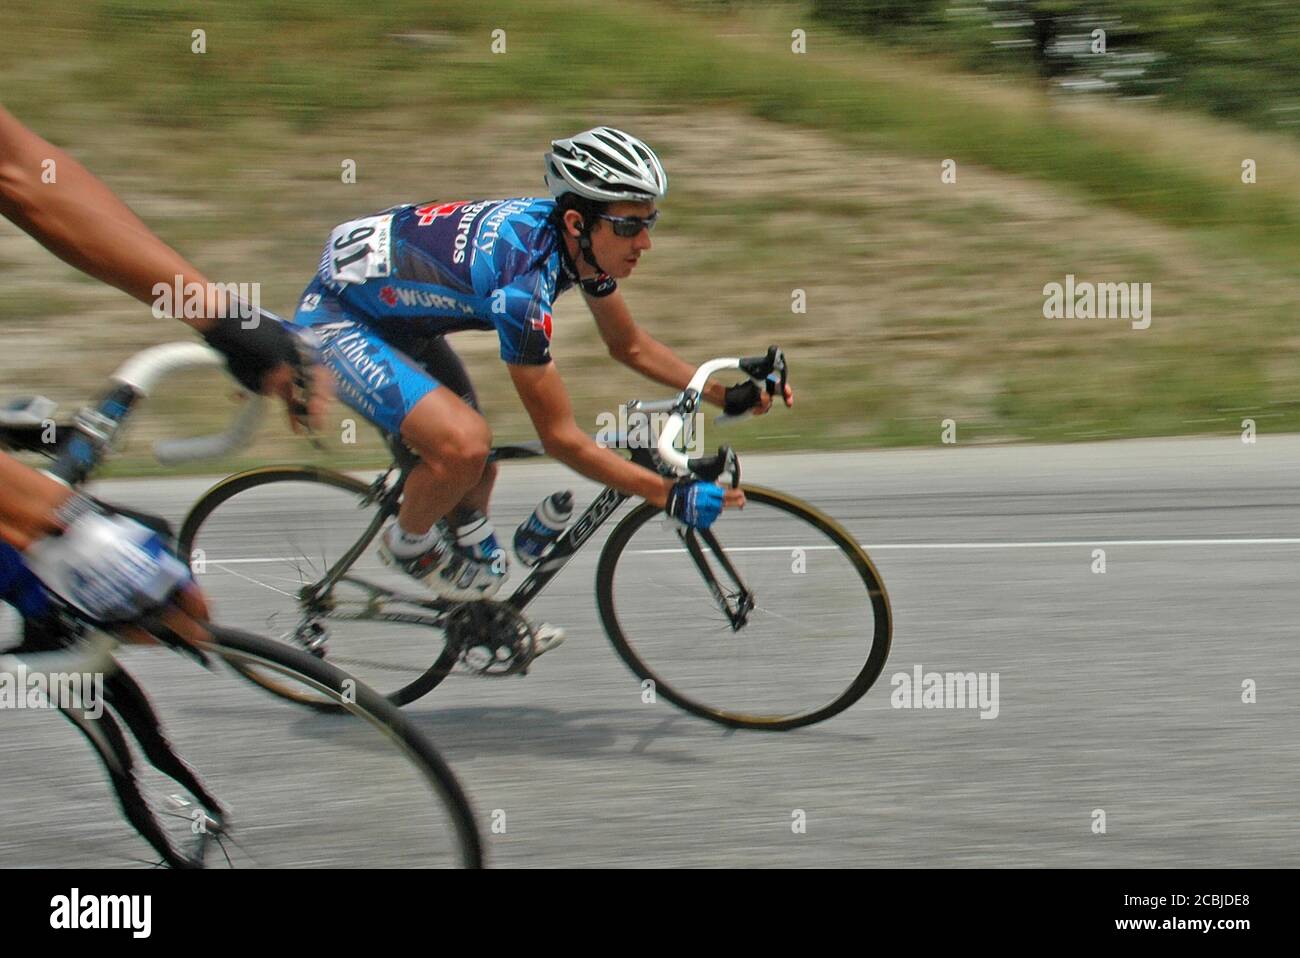 Roberto Heras, the Spanish professional road cyclist competing in the 2005 Tour de France - Stage 11: Courchevel - Briançon. Stock Photo